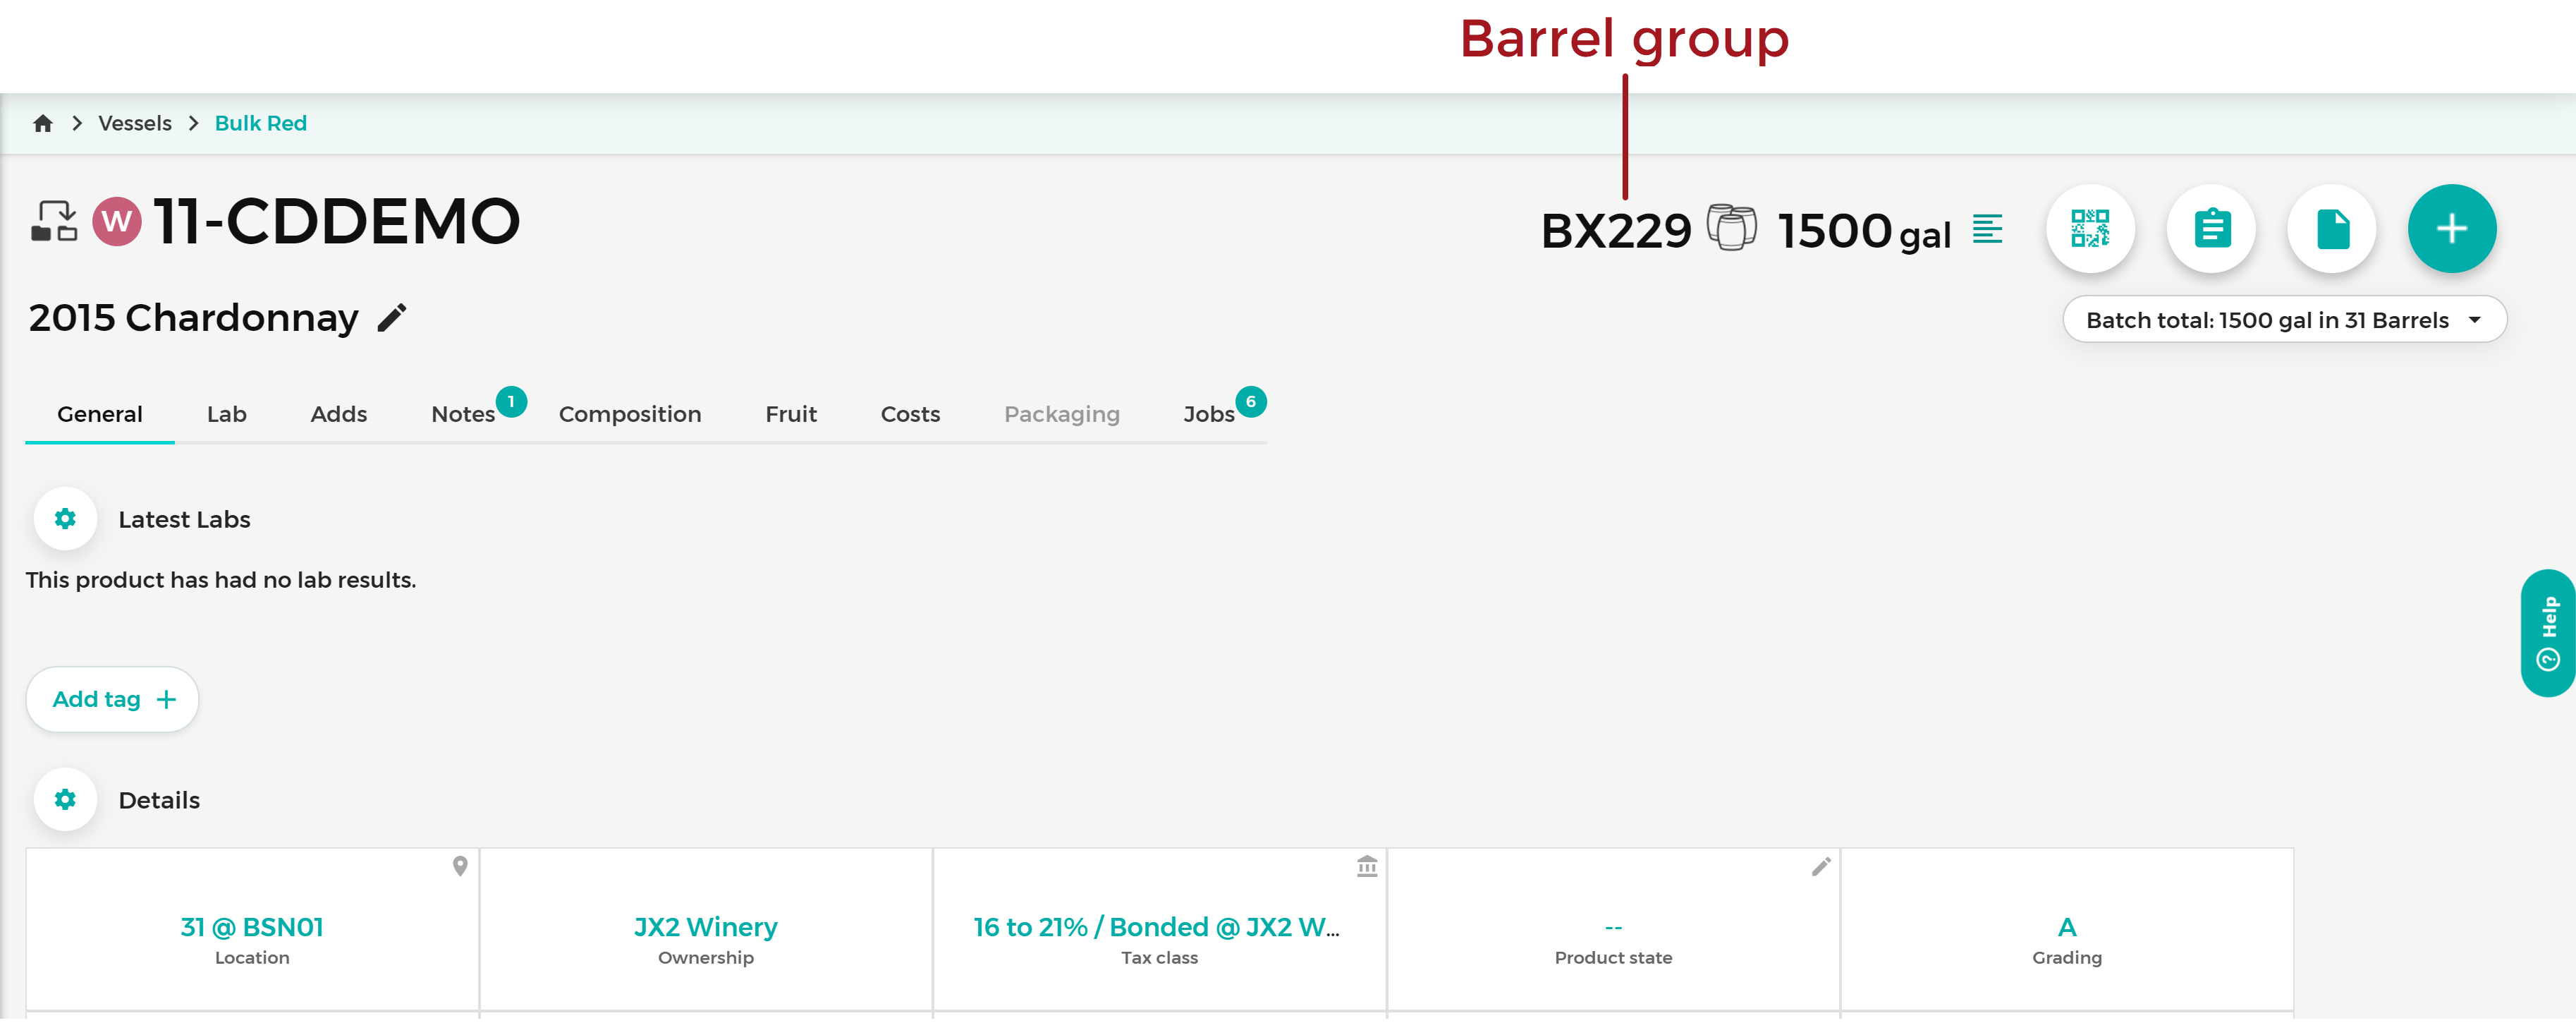 Product_-_Barrel_Group_20200508.png